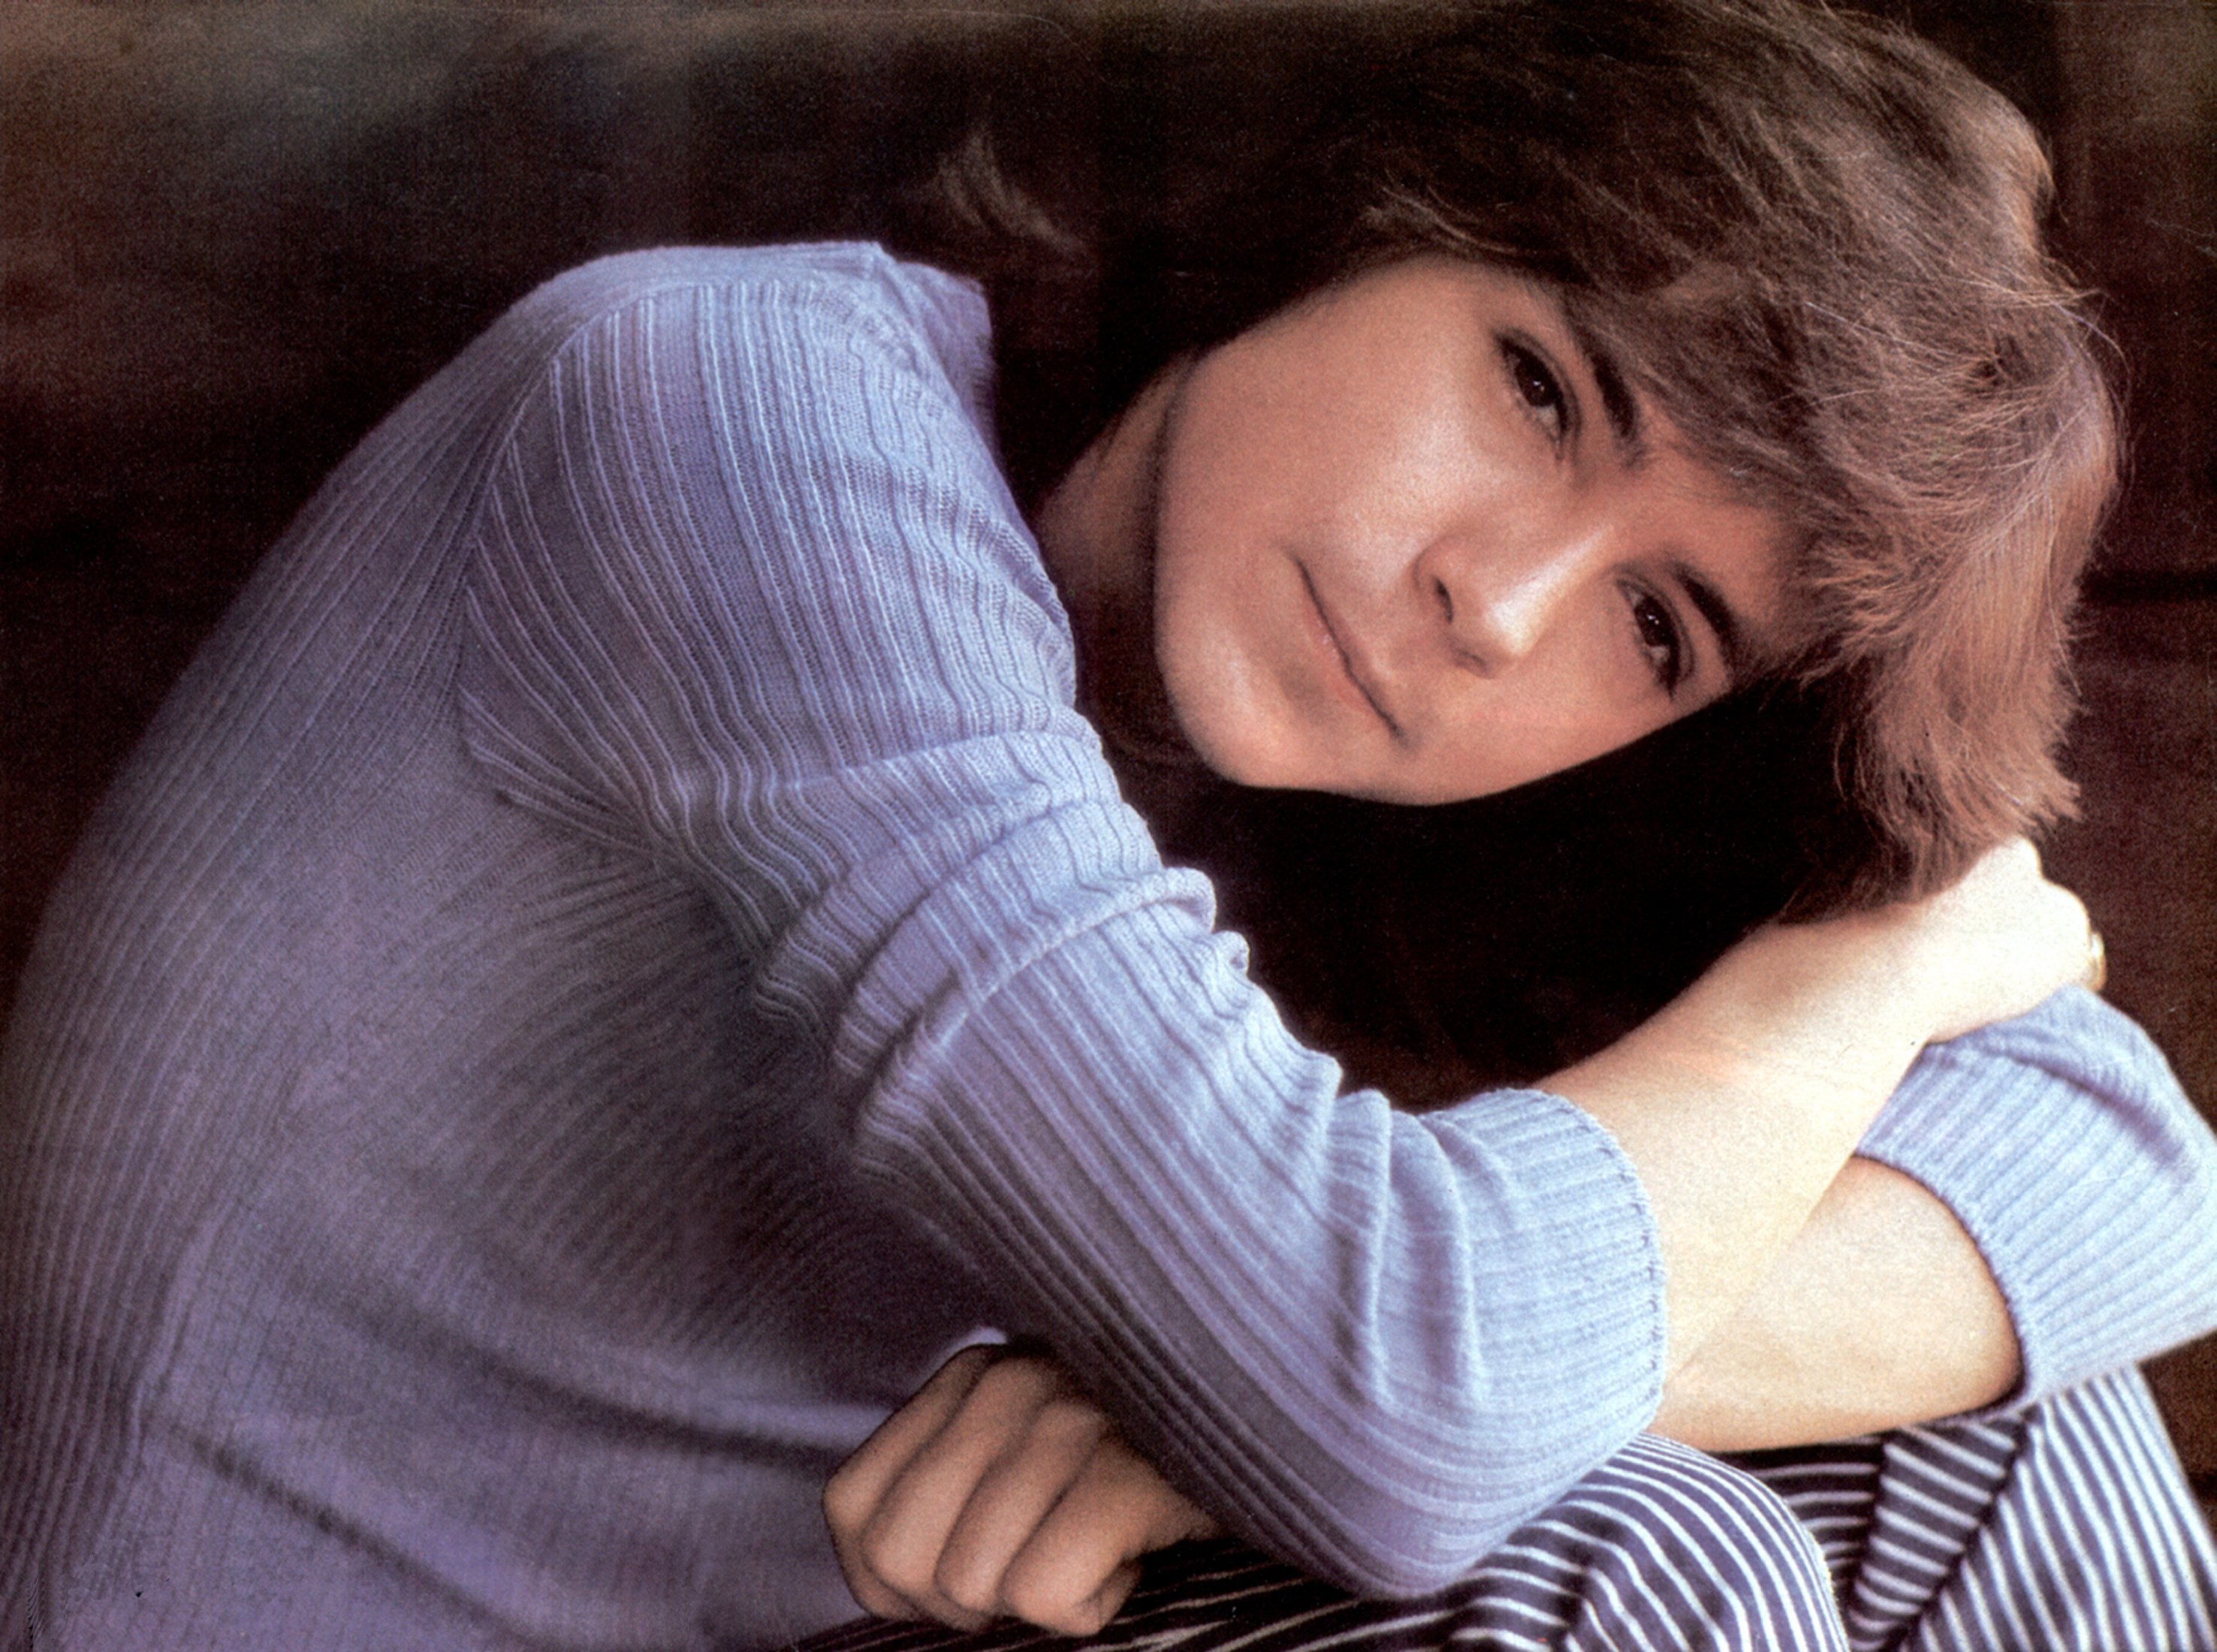 David Cassidy of The Partridge Family wearing blue